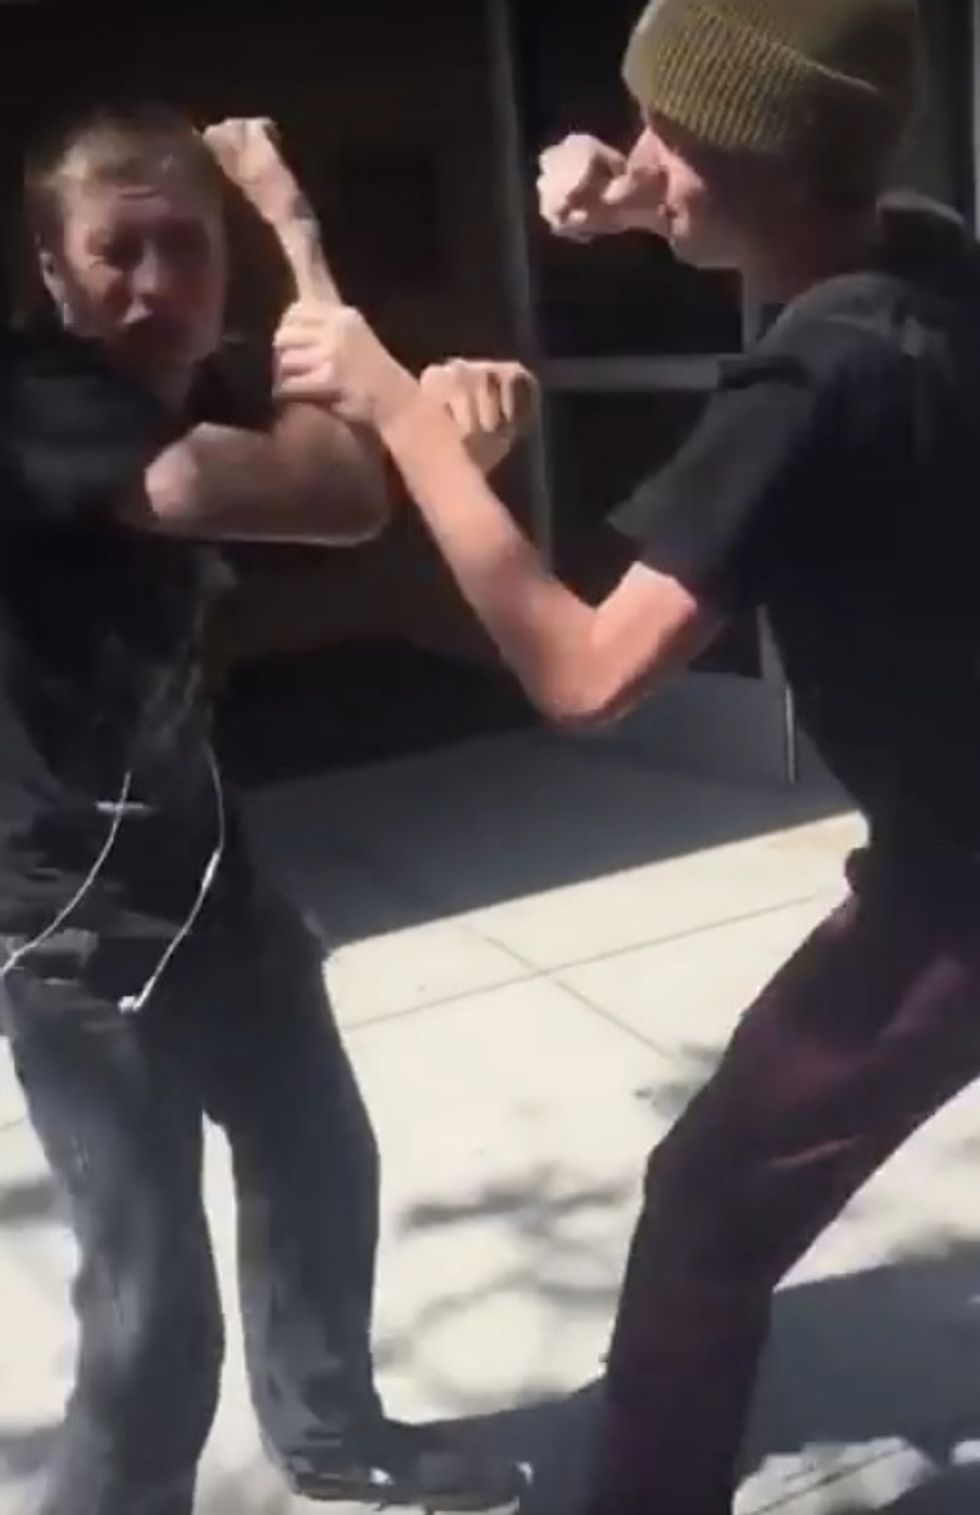 Caught on Video: With One Punch, ‘Hero’ Student Delivers Painful Dose of Justice to Bully Who Allegedly Beat Up Blind Kid (UPDATED)